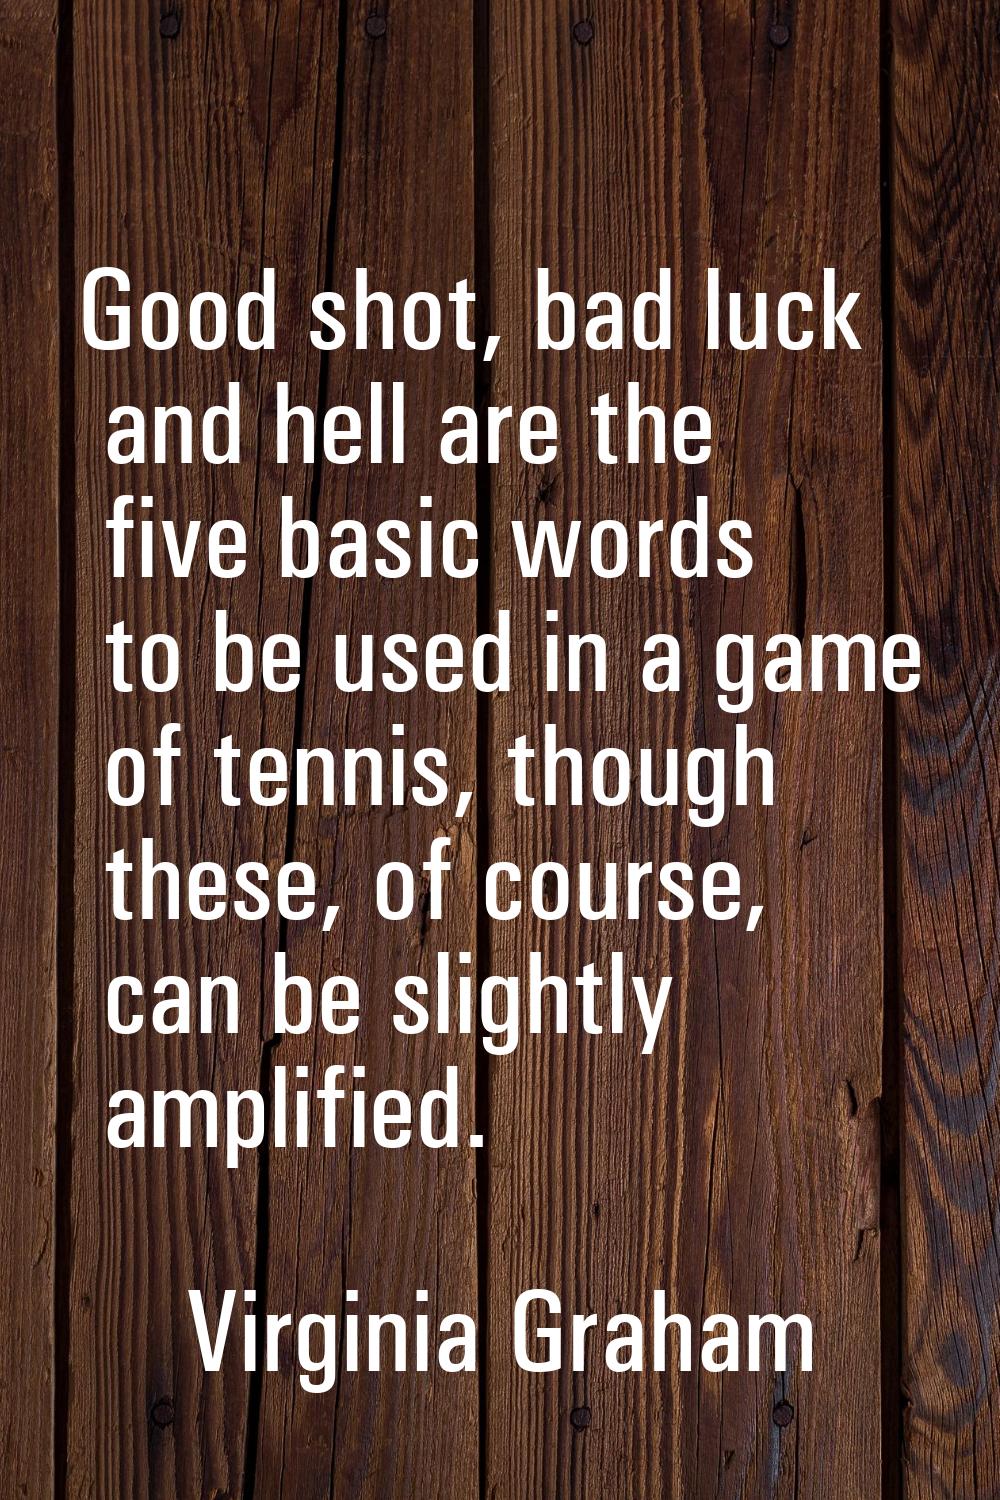 Good shot, bad luck and hell are the five basic words to be used in a game of tennis, though these,